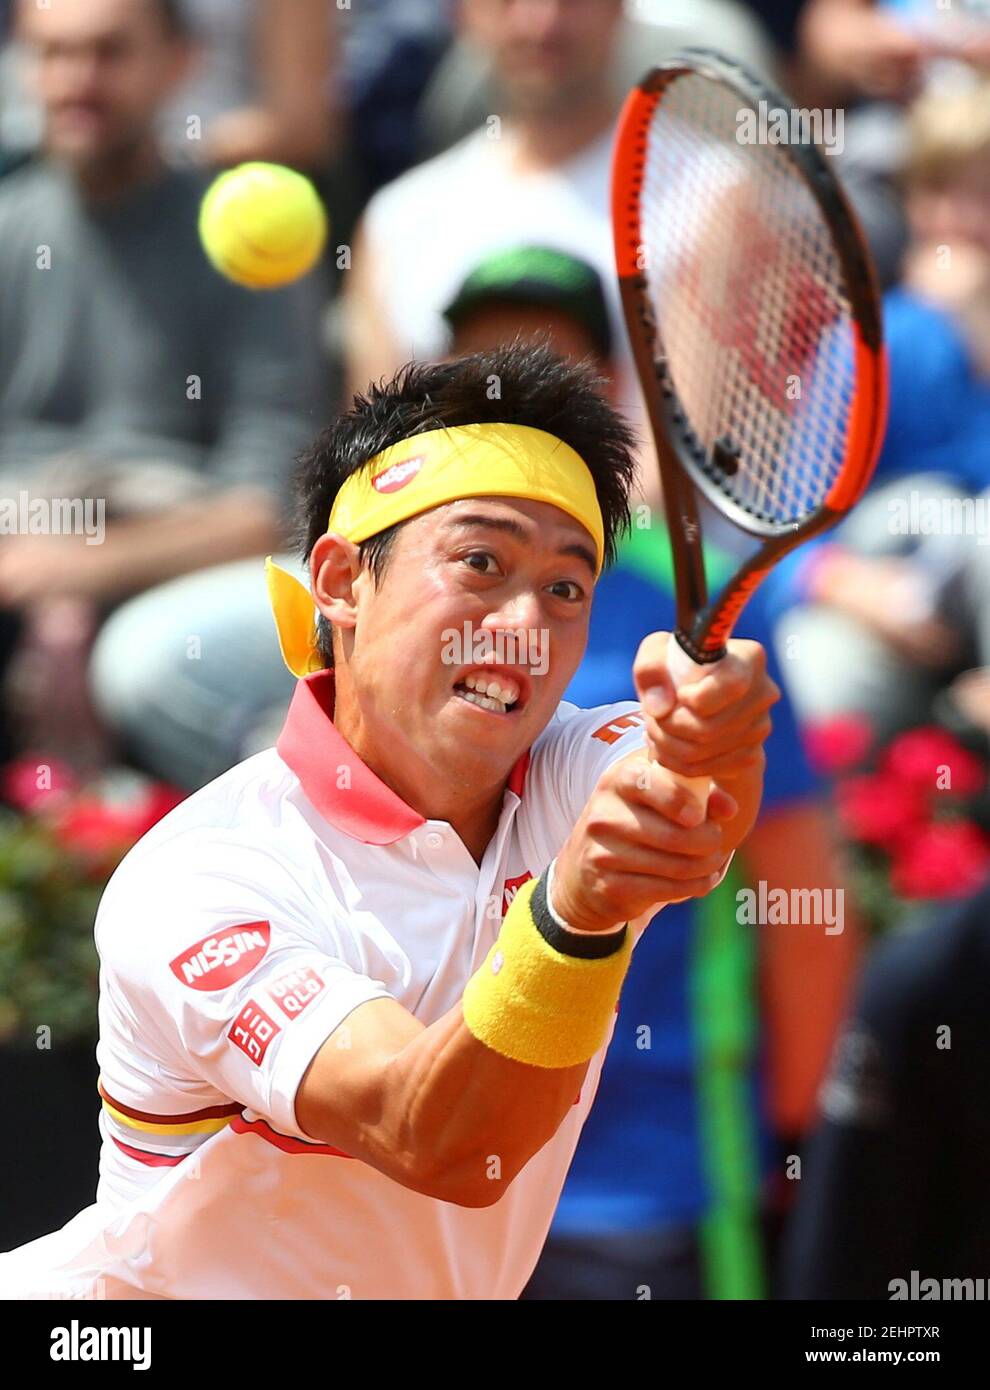 Tennis - ATP World Tour Masters 1000 - Italian Open - Foro Italico, Rome, Italy - May 16, 2018   Japan's Kei Nishikori in action during his second round match against Bulgaria's Grigor Dimitrov   REUTERS/Alessandro Bianchi Stock Photo